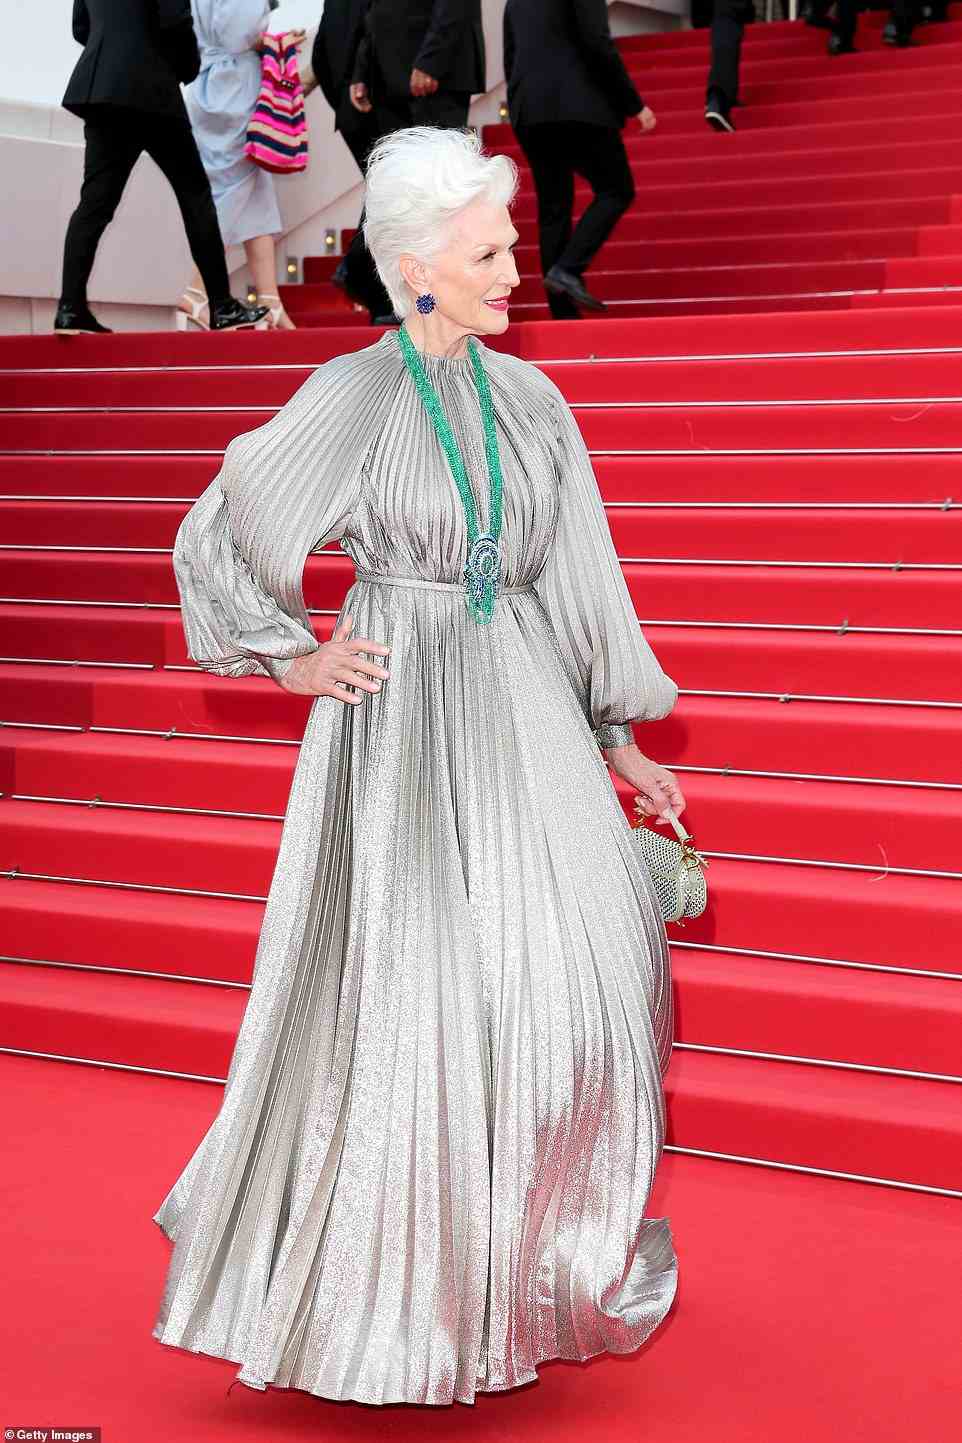 Classy: Maye Musk looked like the epitome of elegance in a pale grey silk gown with a belt to cinch her in at her svelte waist